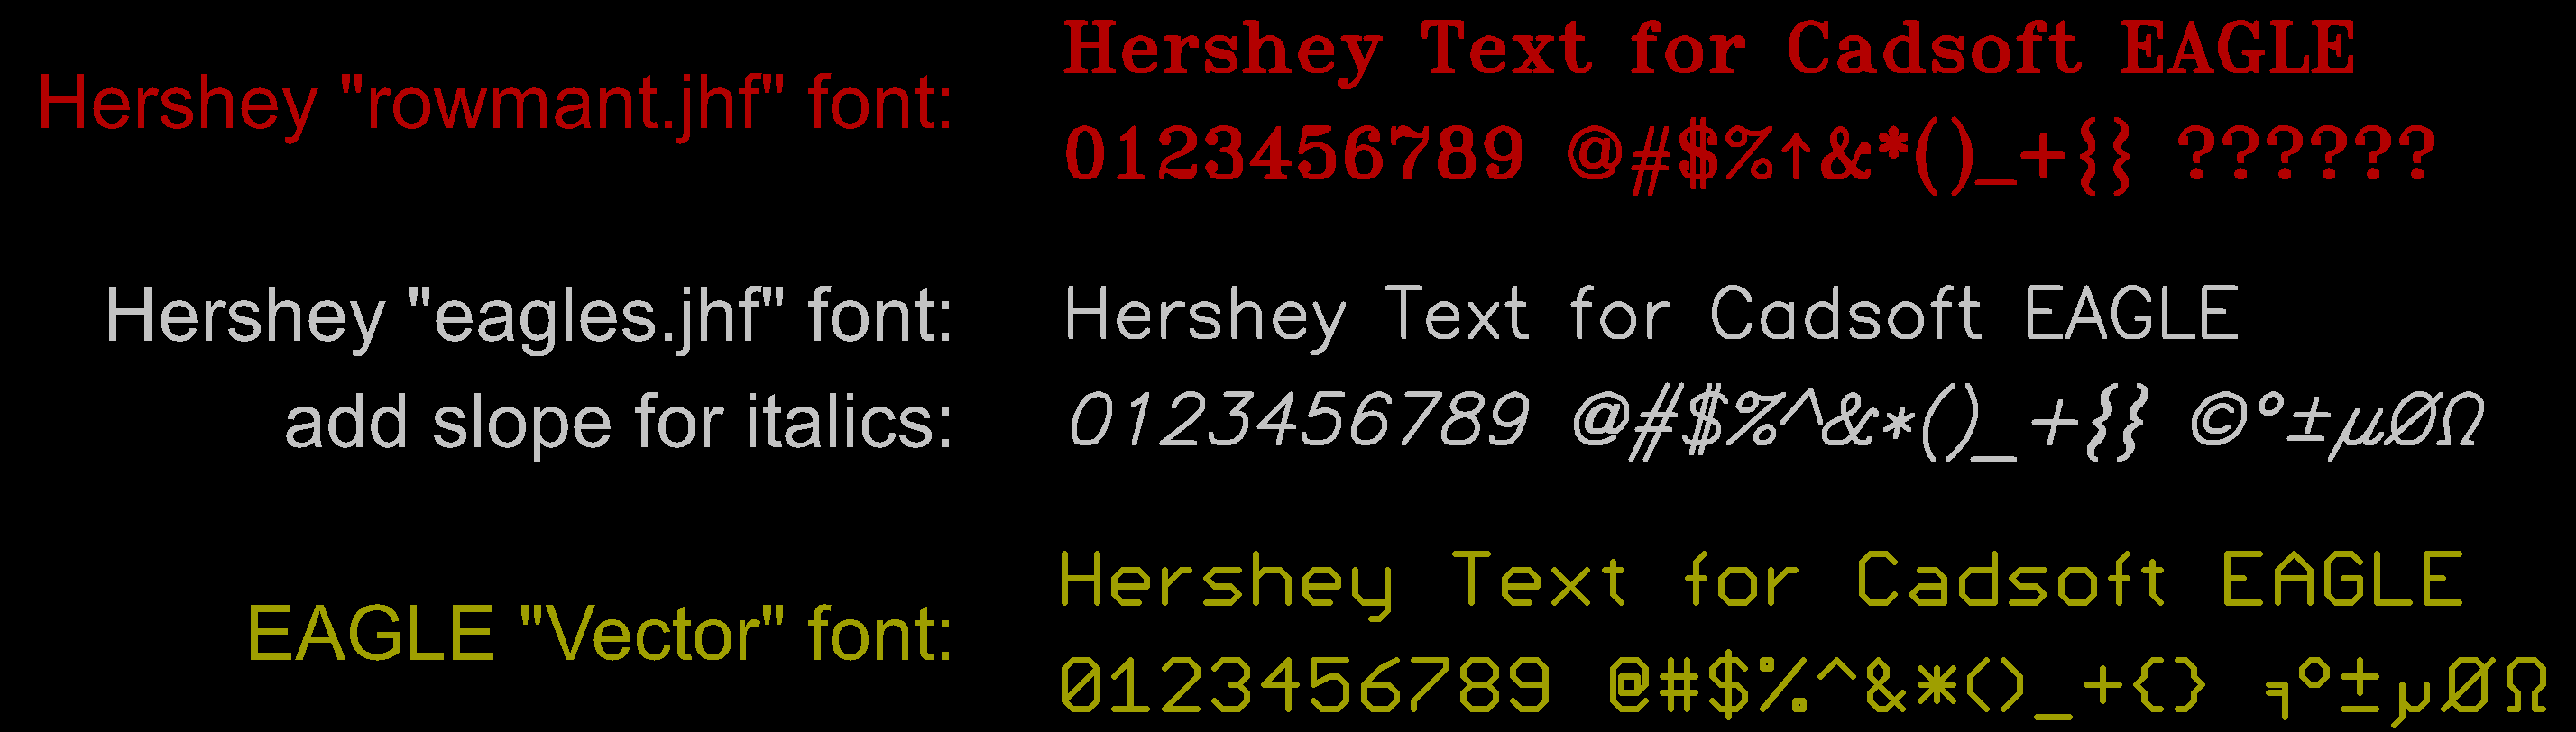 Hershey Text in EAGLE